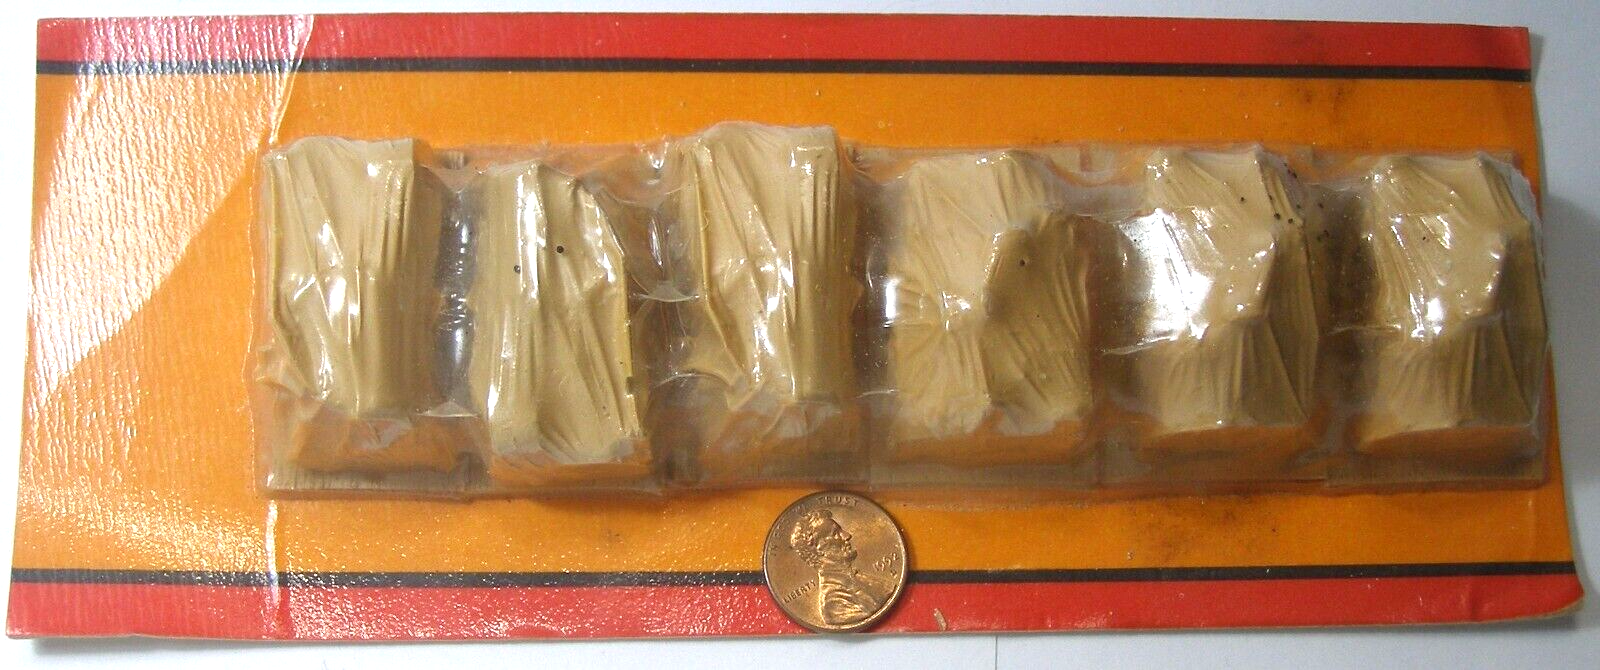 Primary image for Unknown Brand HO Scale Model Railroad Tarped Cargo 6ct.   BP5